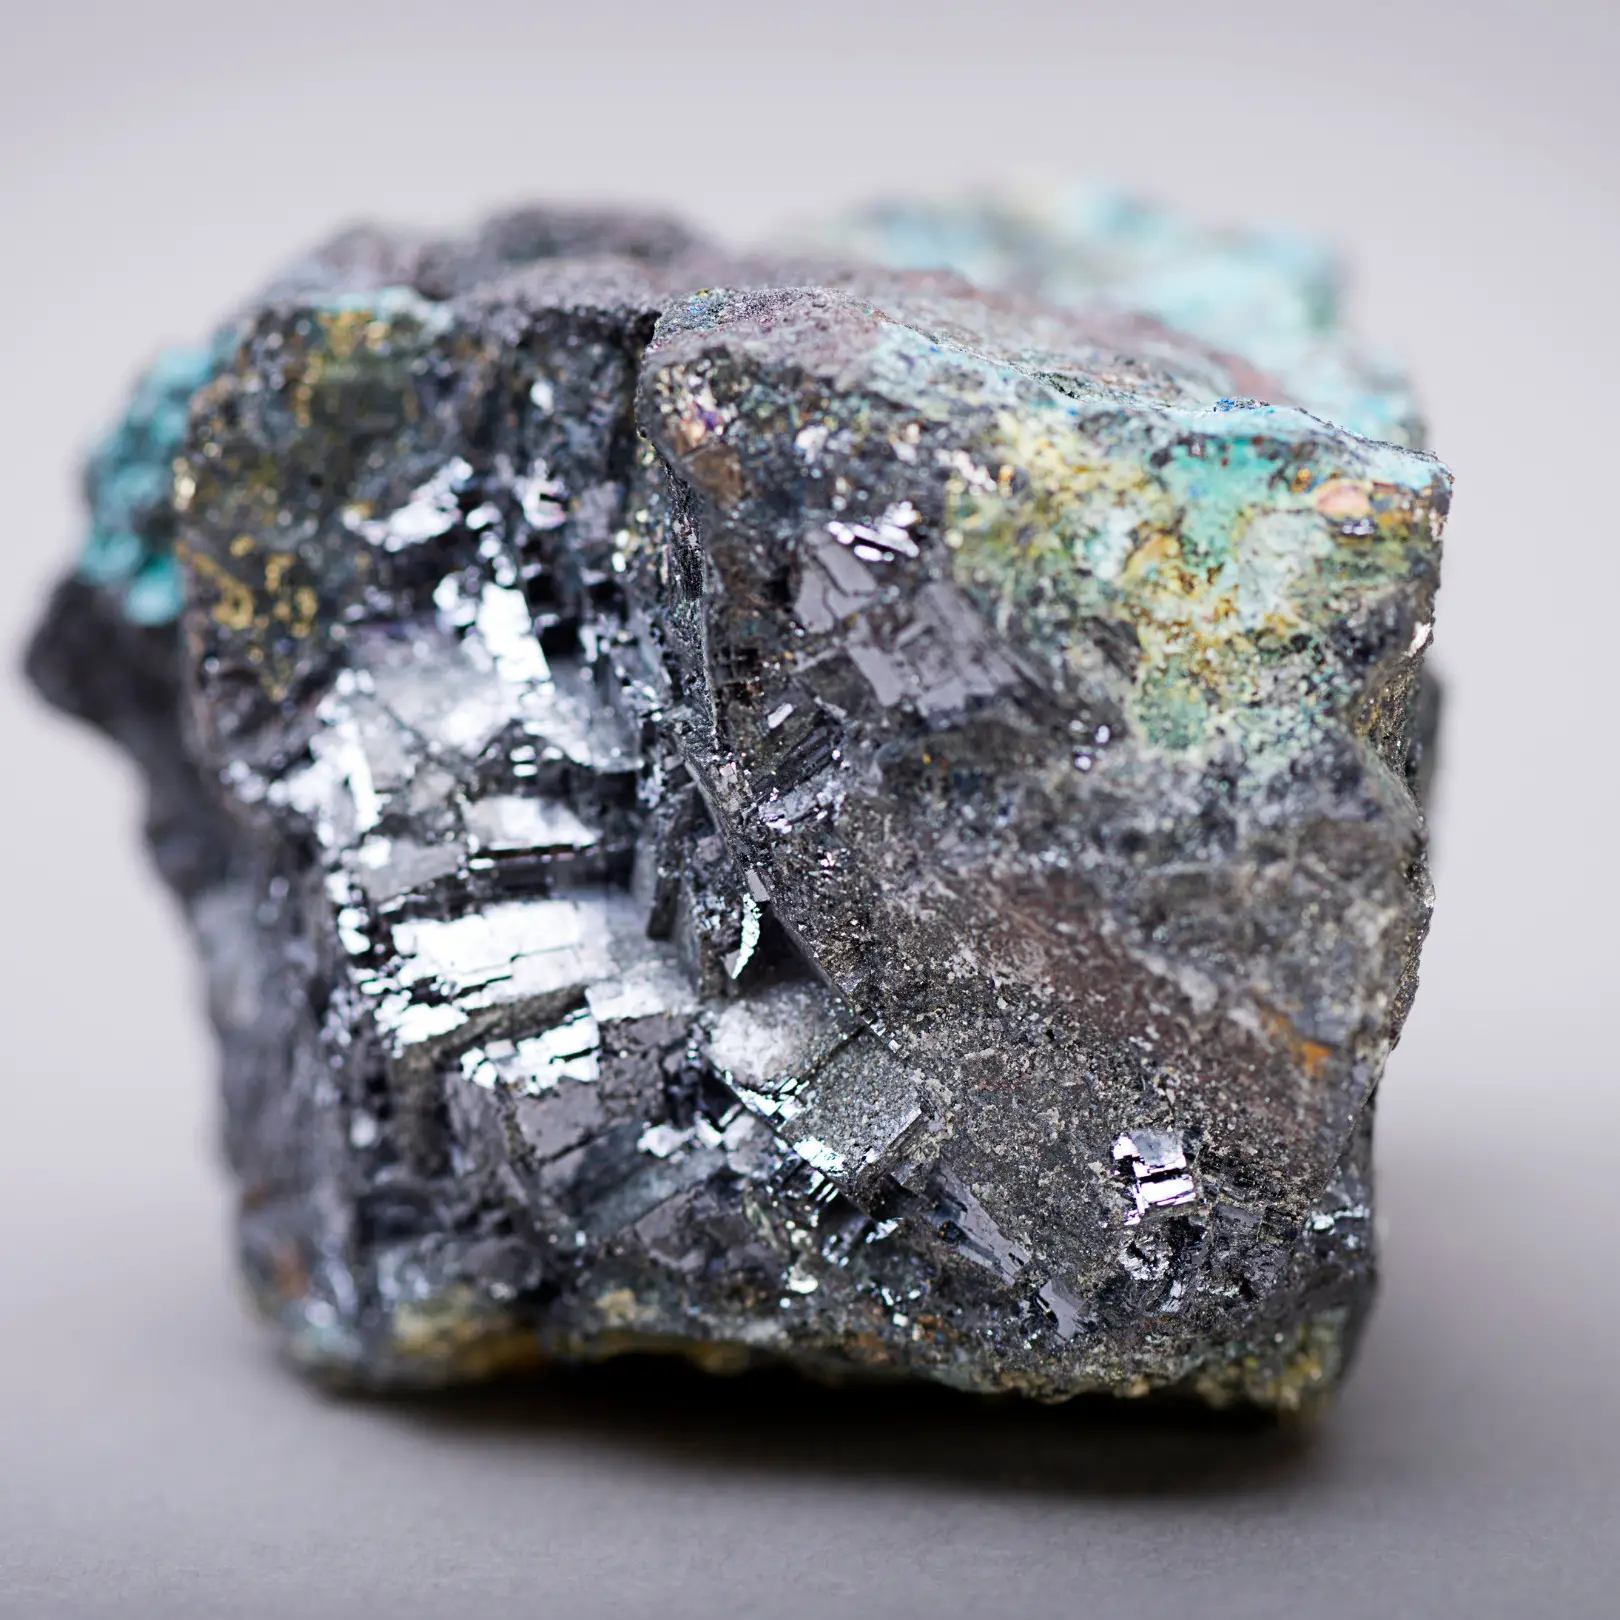 How to Tell if Hematite is Real or Fake